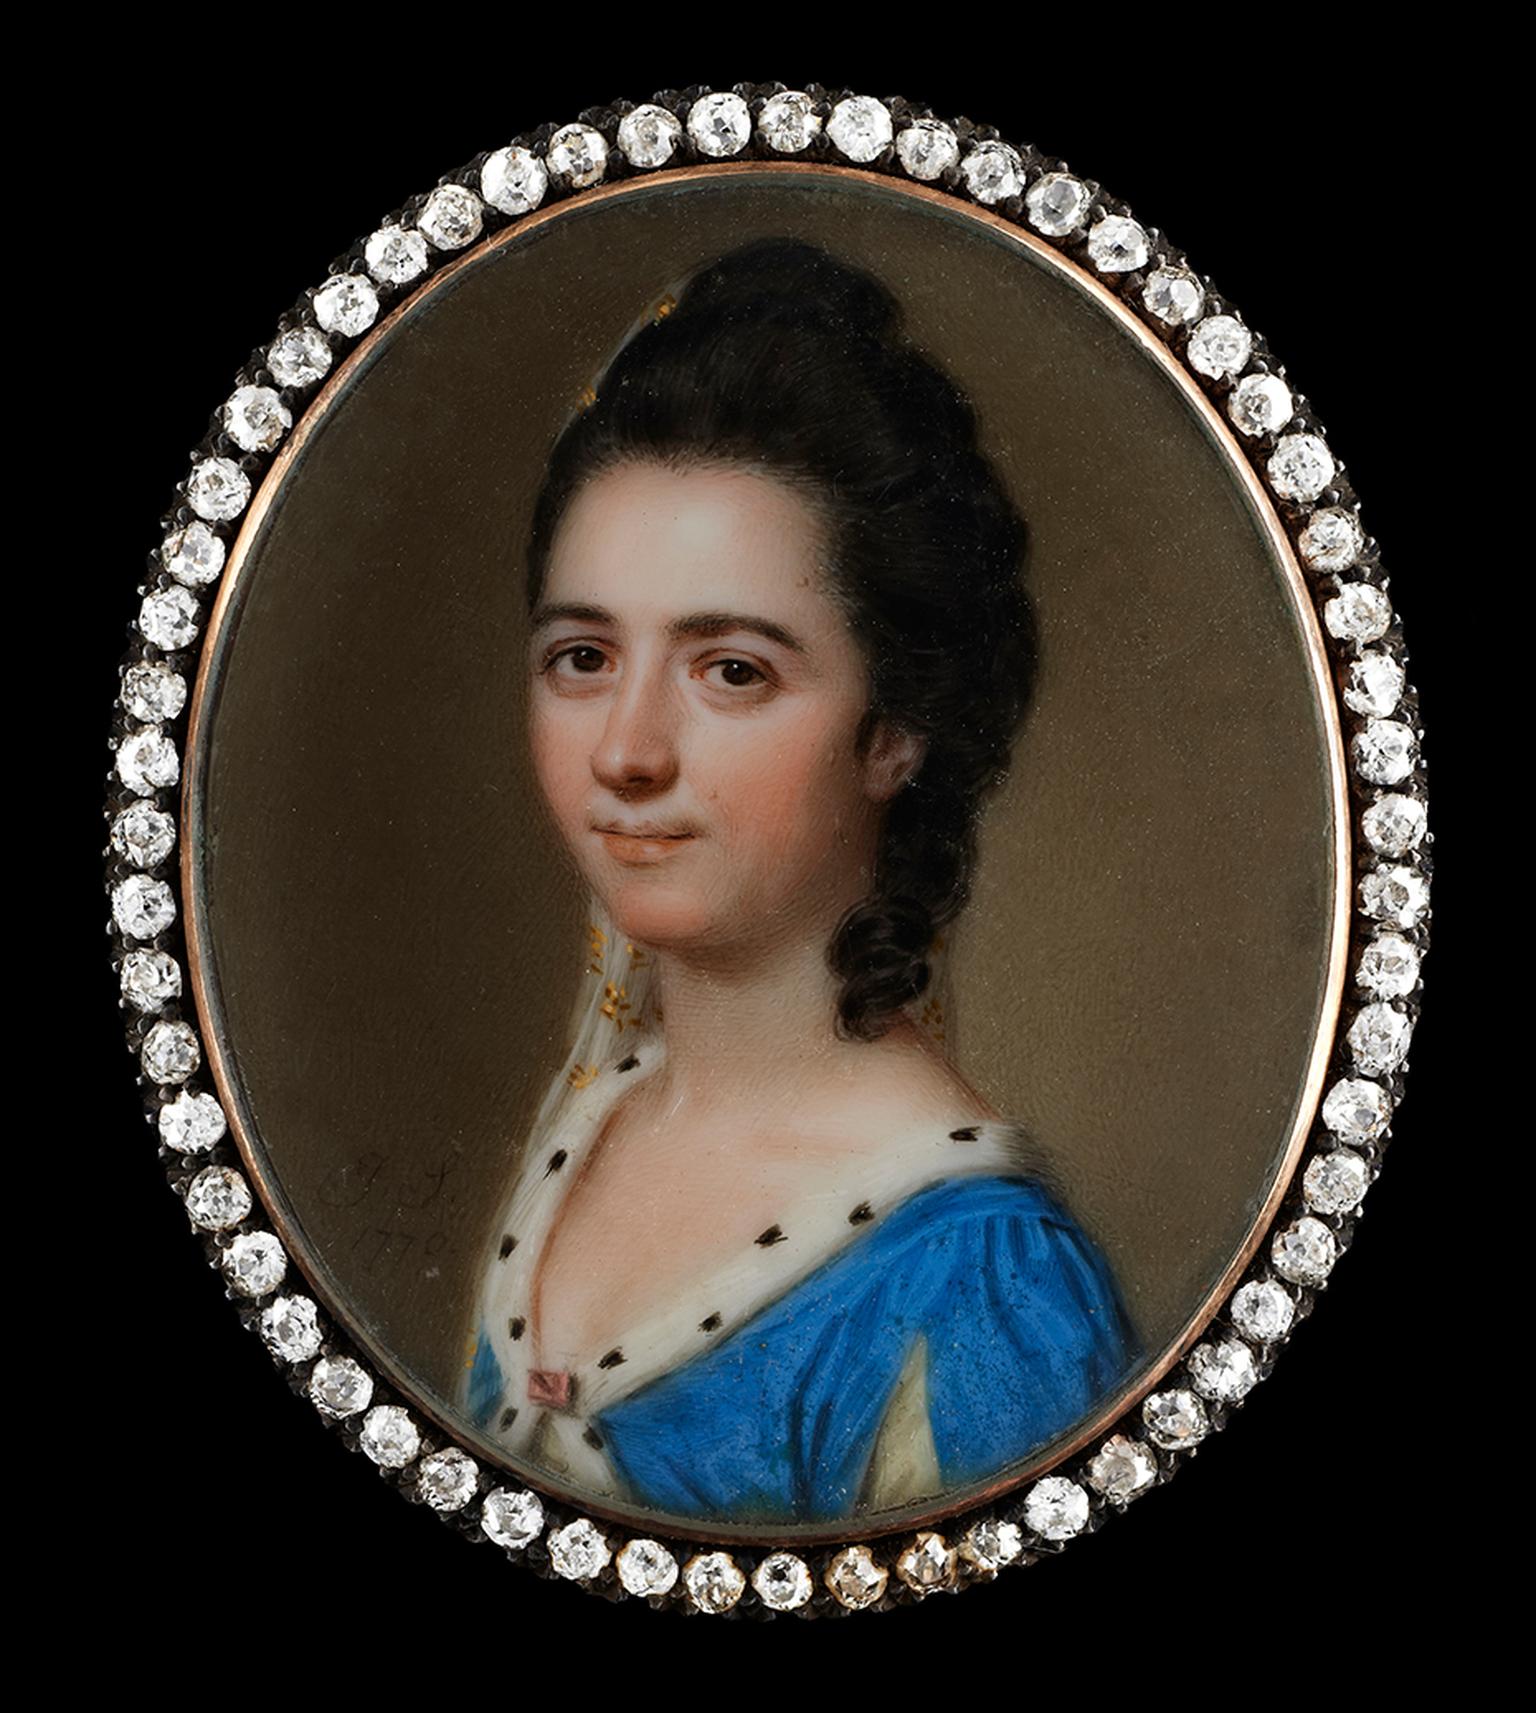 John-Smart-'A-Lady,-identified-as-‘Miss-Byron’-wearing-an-ermine-trimmed-blue-dress.'-Cred--Philip-Mould-&-Company..jpg